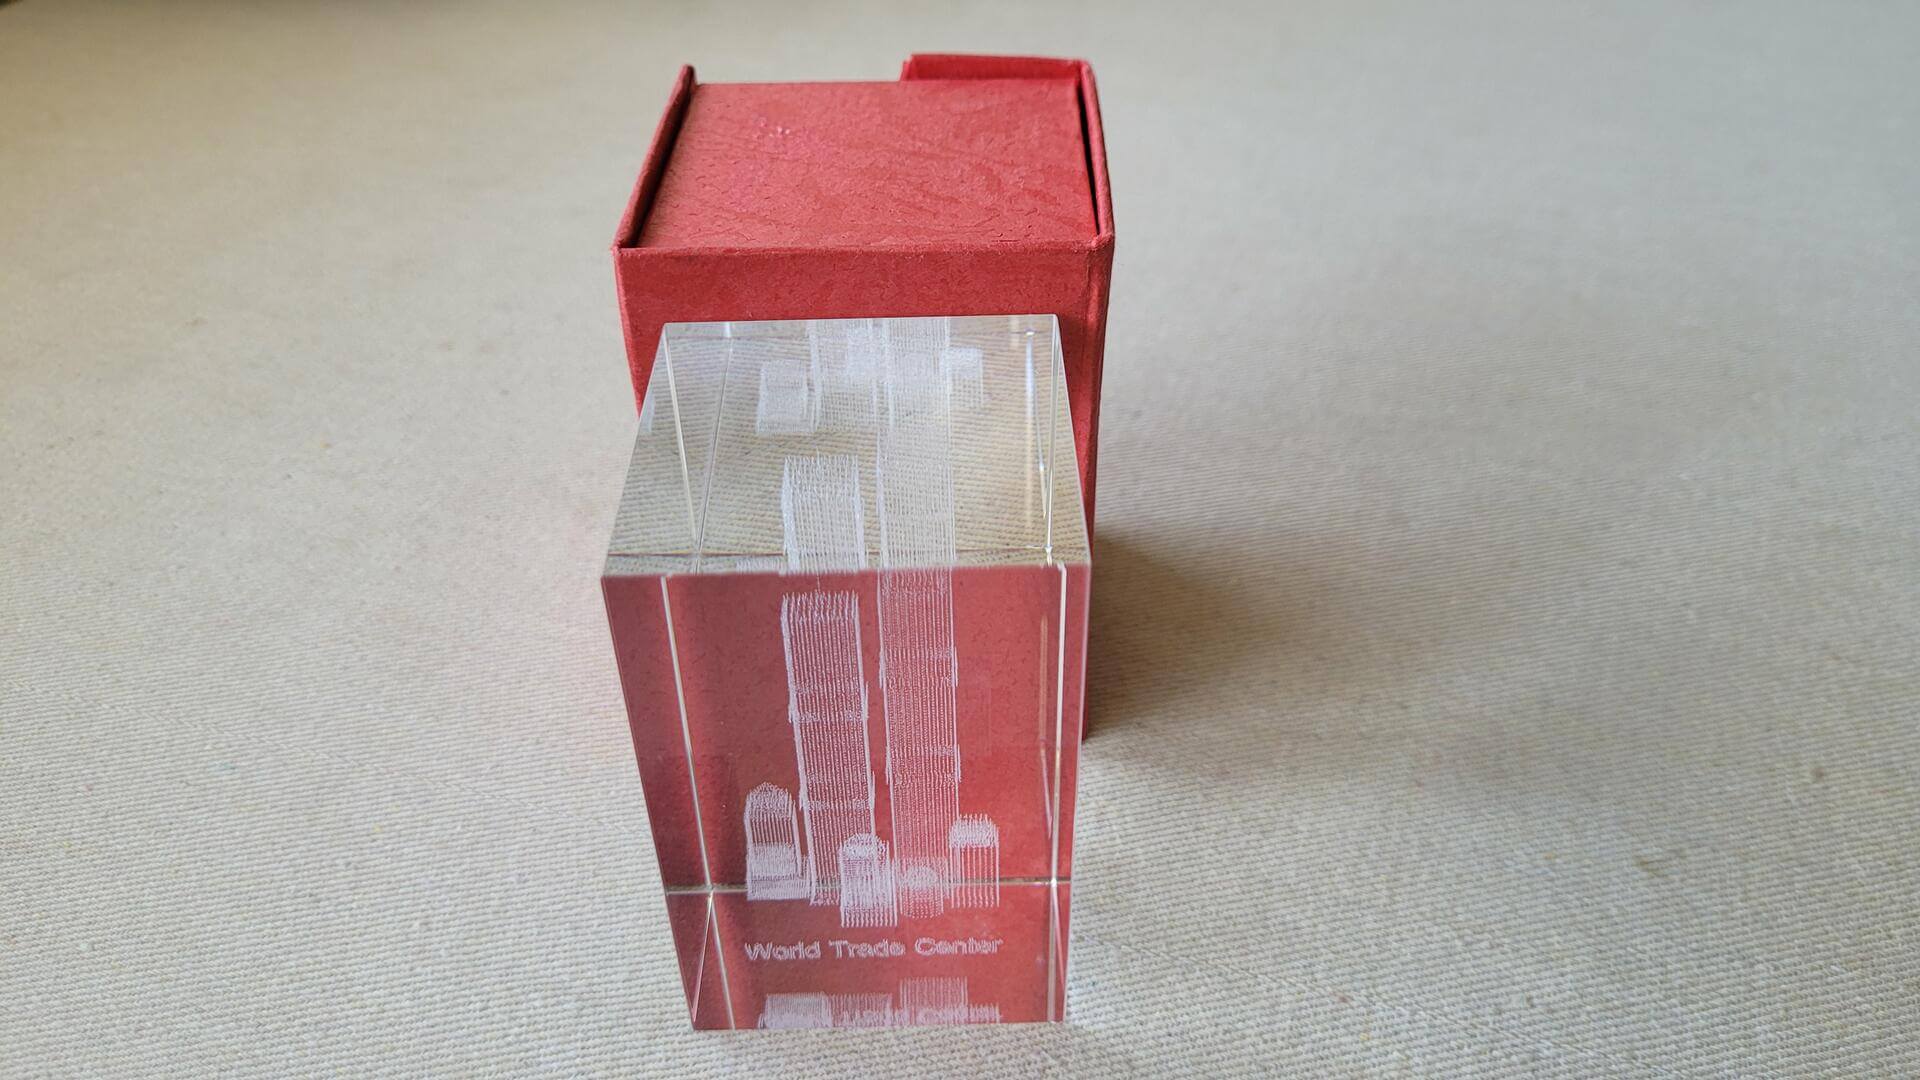 Vintage NYC World Trade Center laser etched crystal glass paperweight w original box. Made in USA Twin Towers memorabilia & laser 3D etched art collectibles